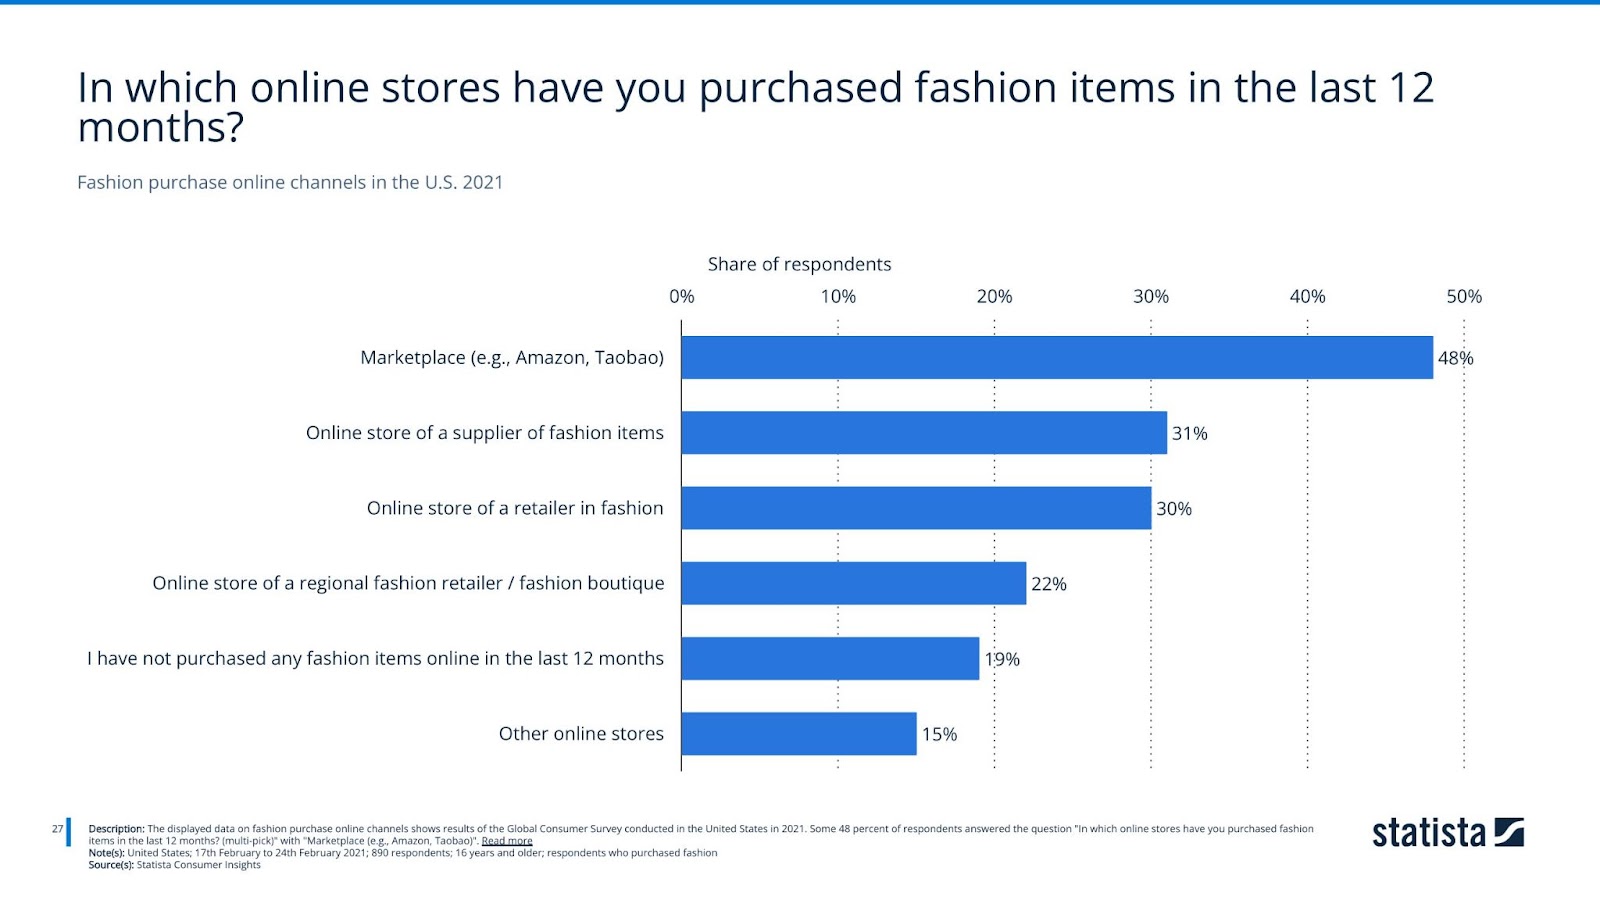 Fashion purchase online channels in the U.S. 2021